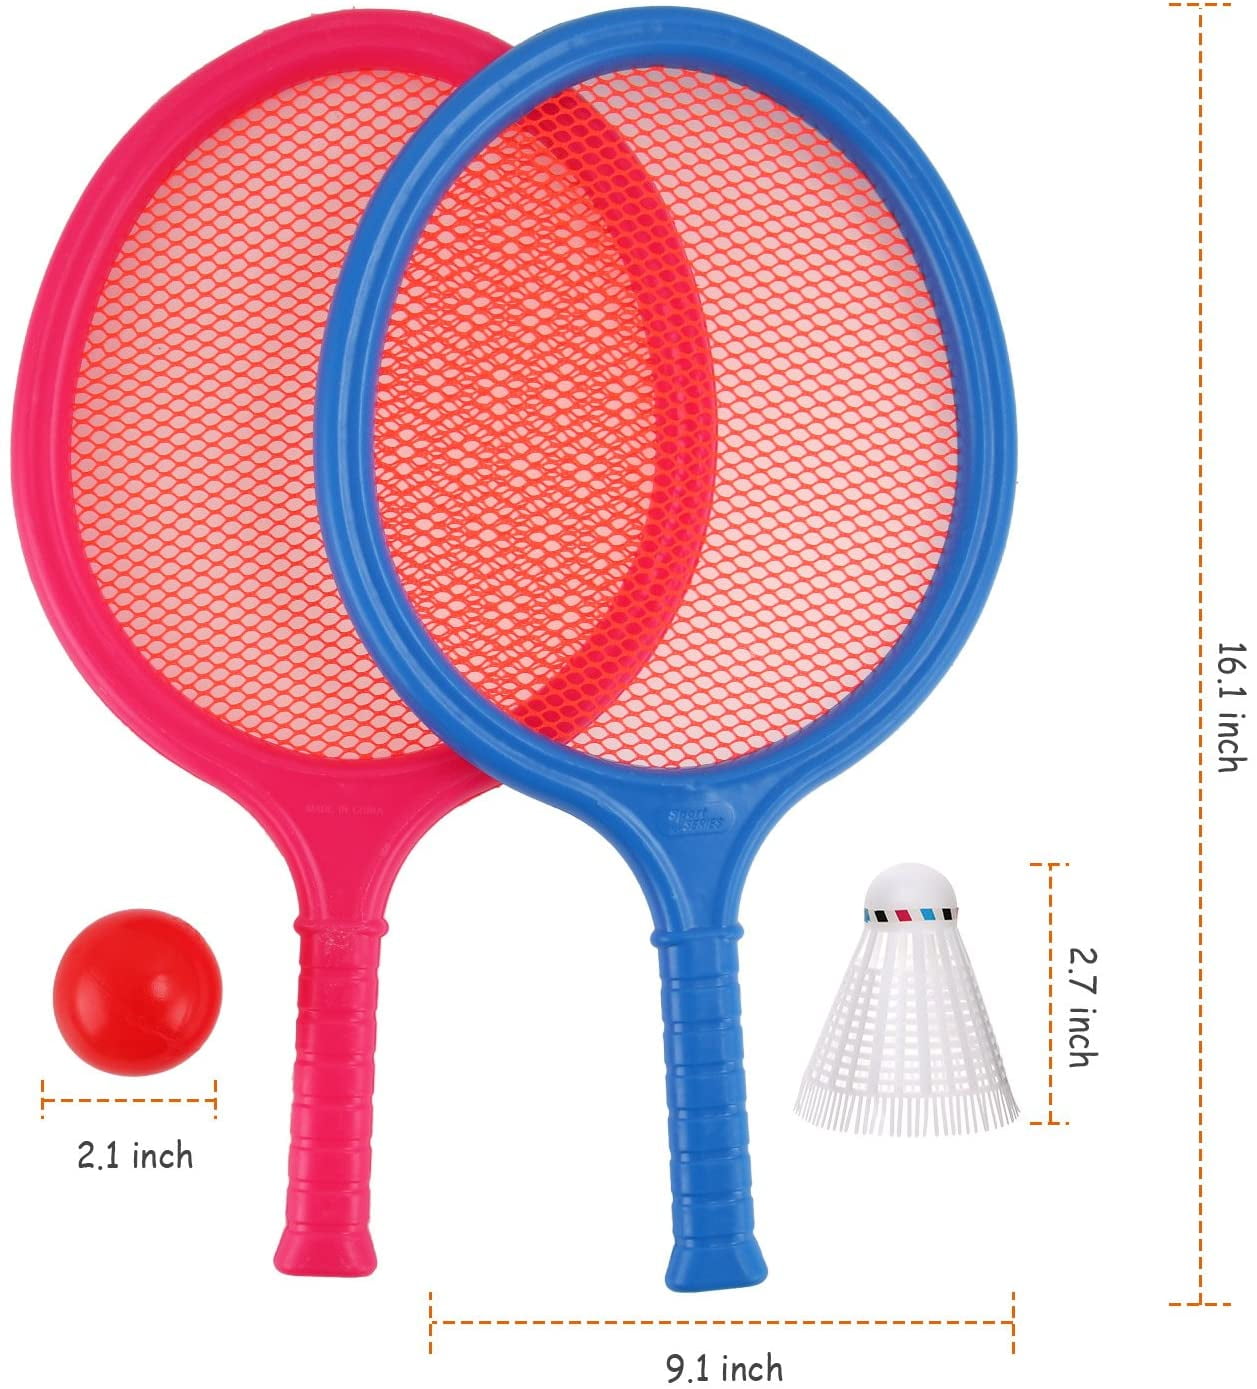 Details about   Return Ball Sports with a mixture of tennis and badminton/Ratesminton Single set 